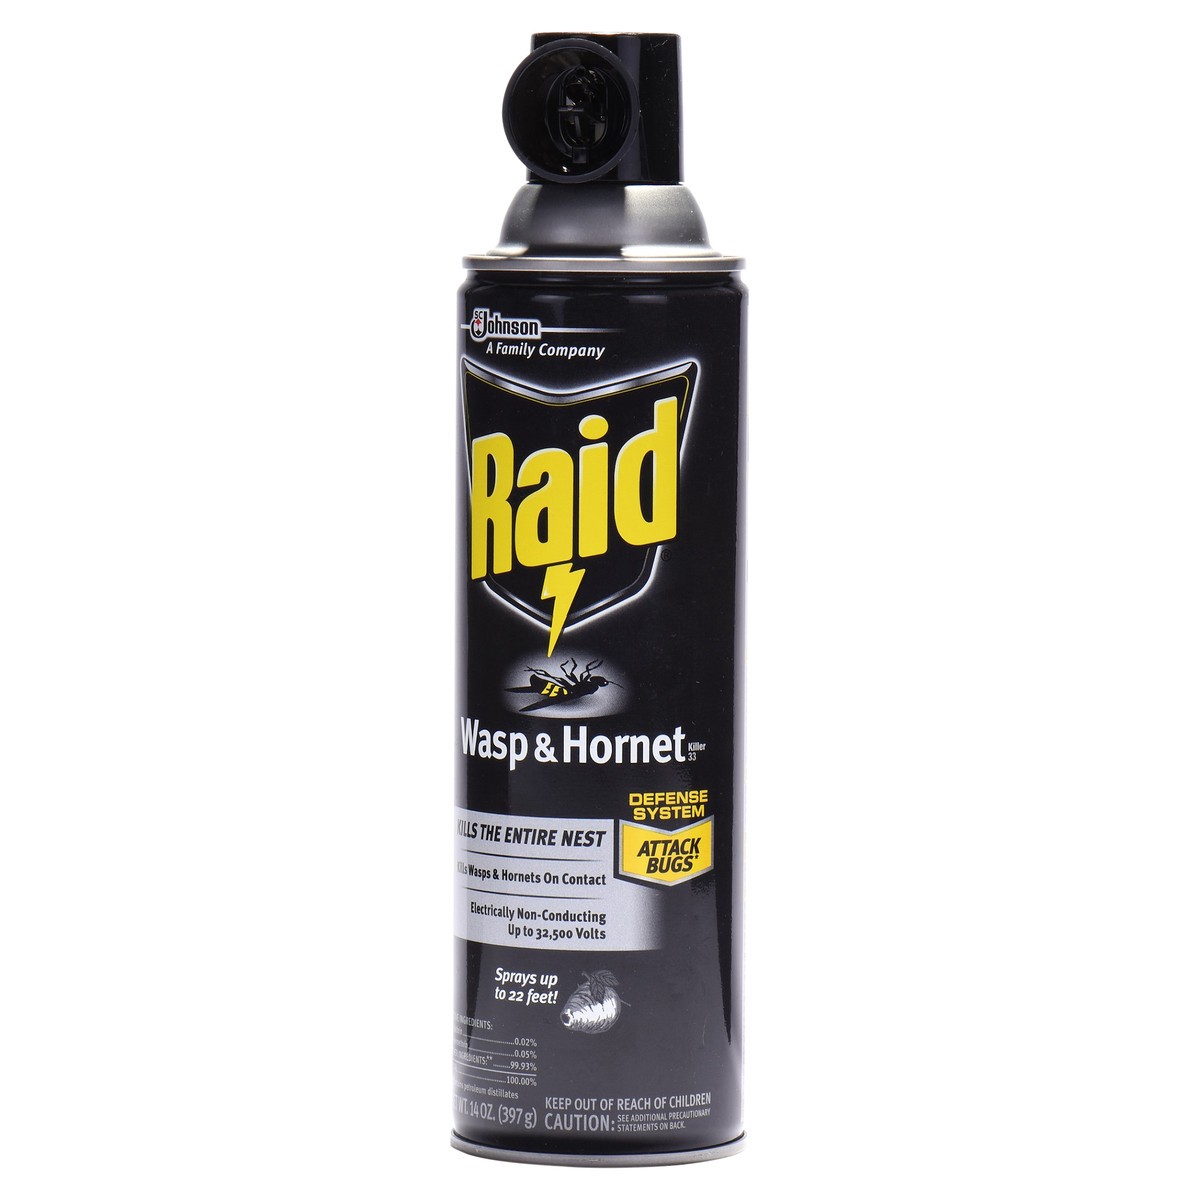 slide 3 of 5, Raid Wasp & Hornet Insect Killer 33, Insect Spray for Stinging Bugs & Their Nests, 14 oz, 14 oz